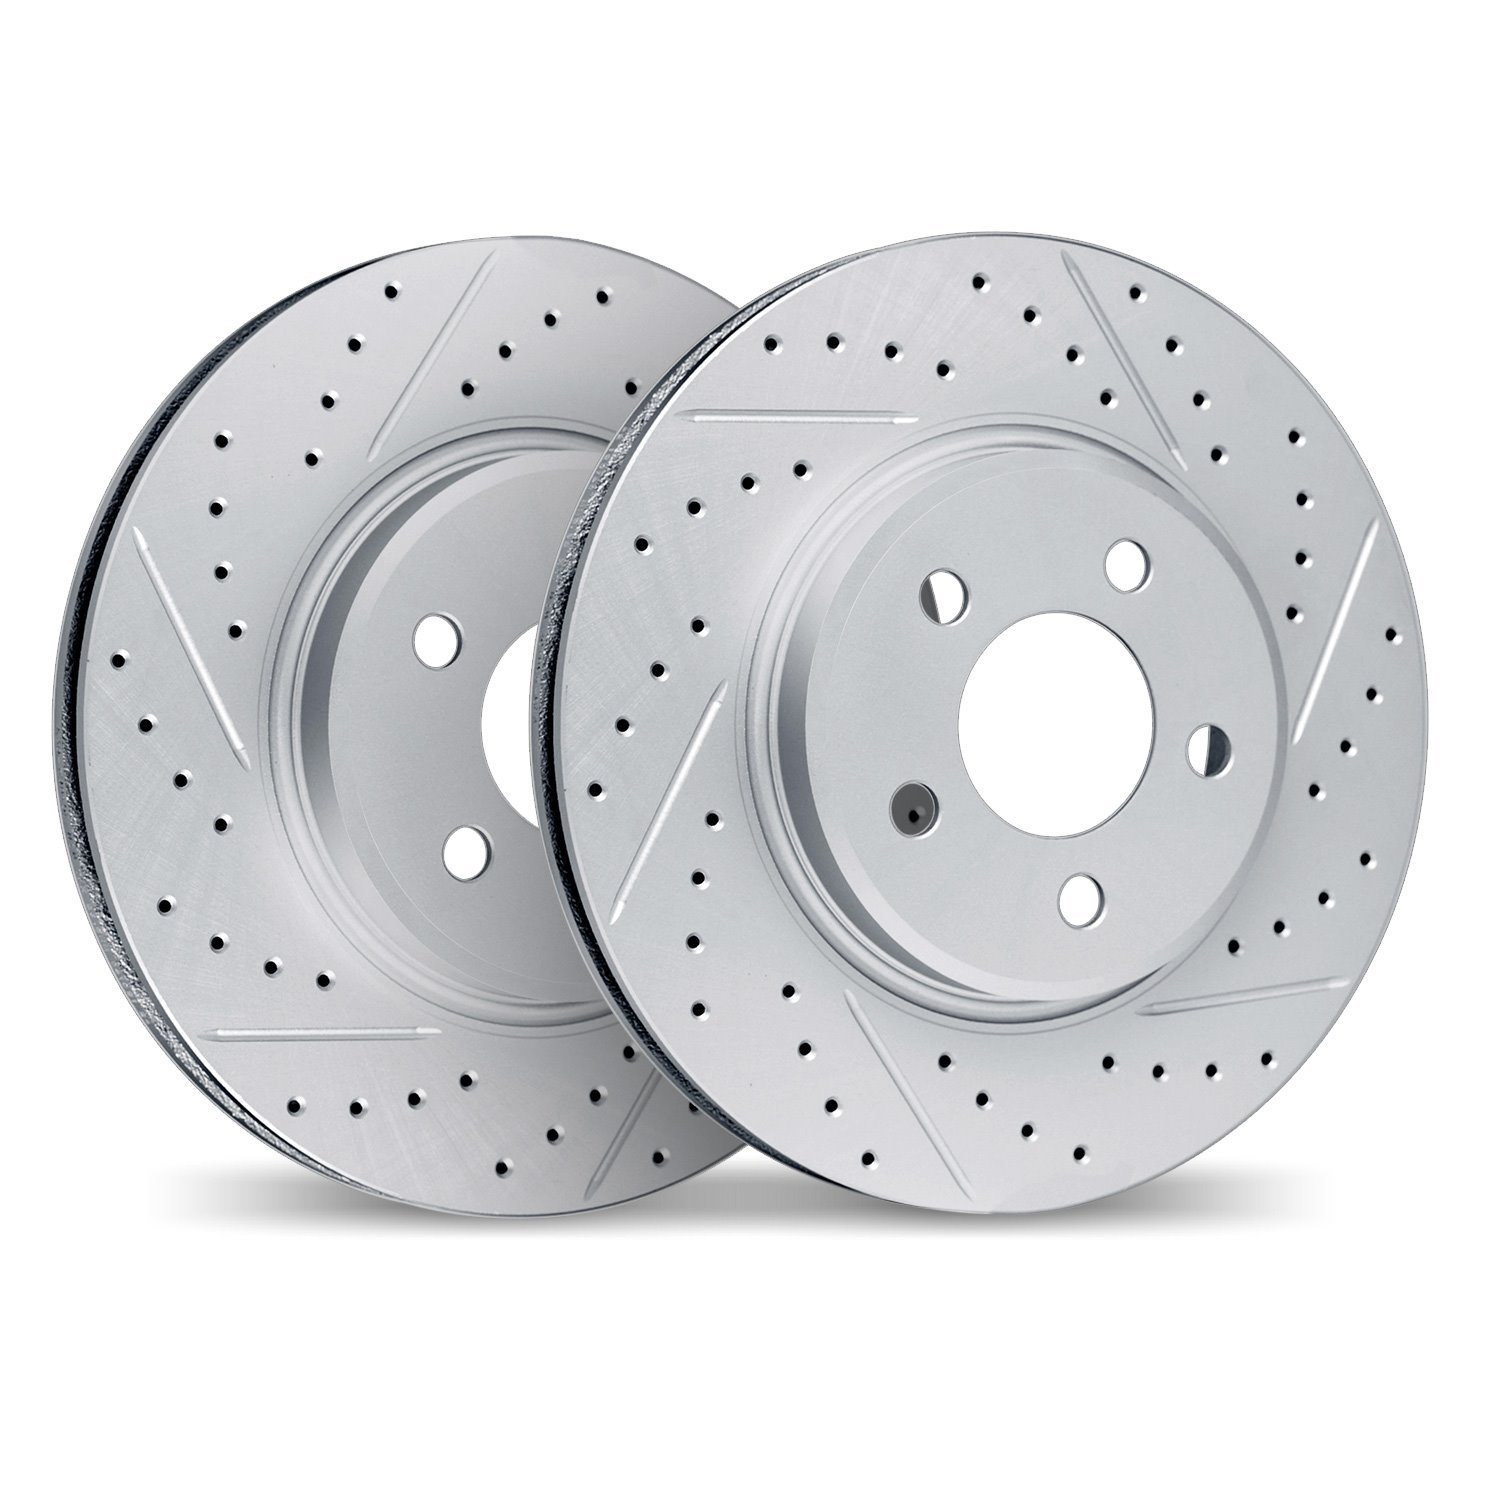 2002-63074 Geoperformance Drilled/Slotted Brake Rotors, Fits Select Mercedes-Benz, Position: Rear